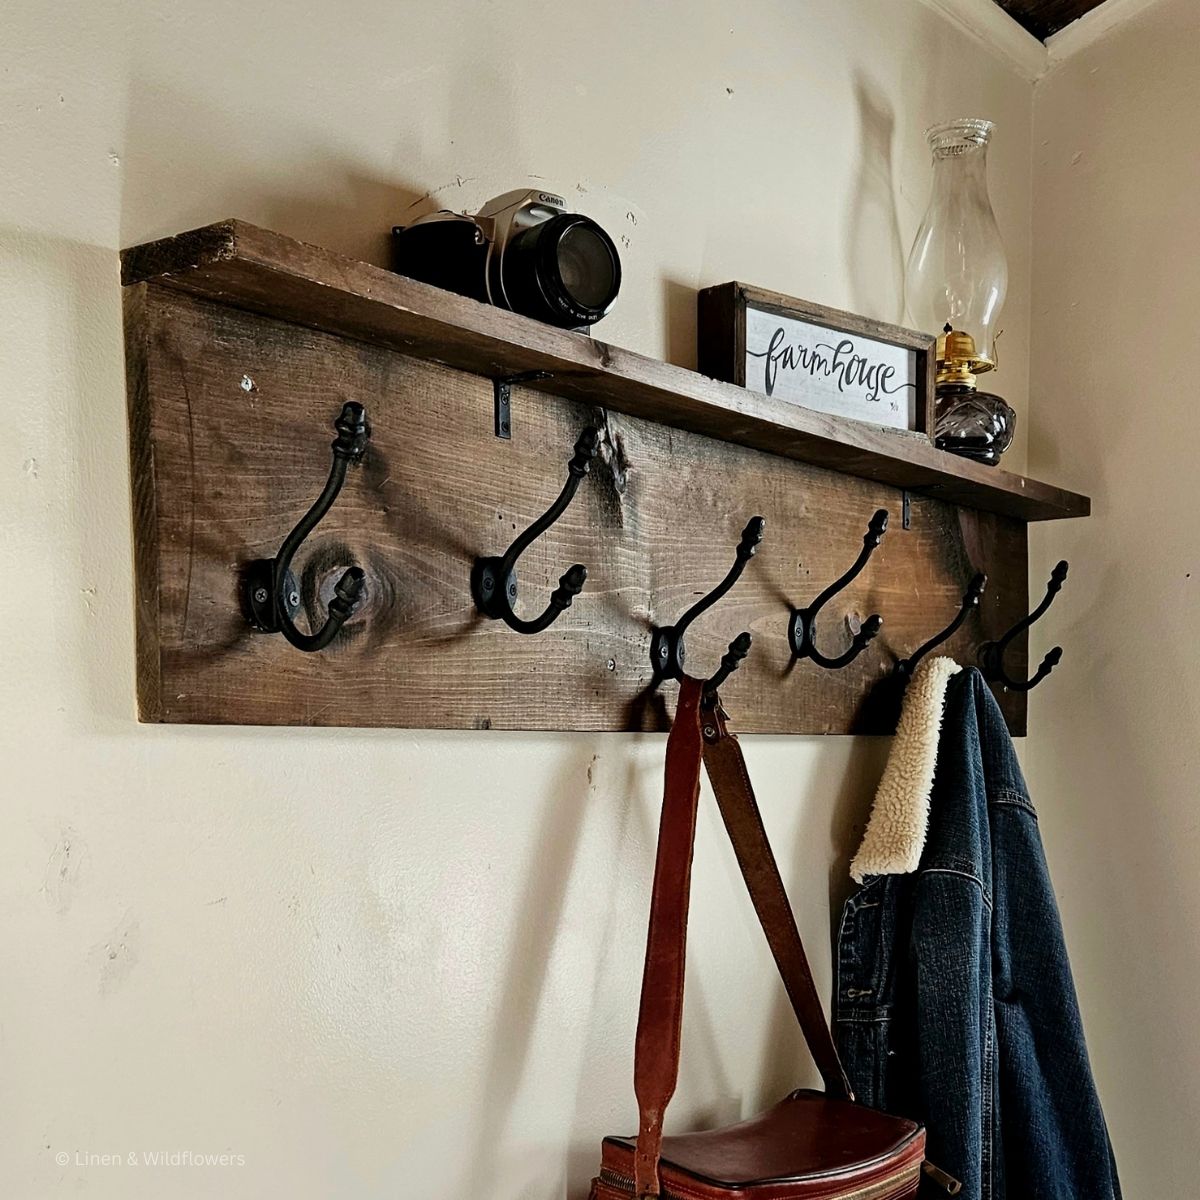 How to Build a Wall-Mounted DIY Coat Rack